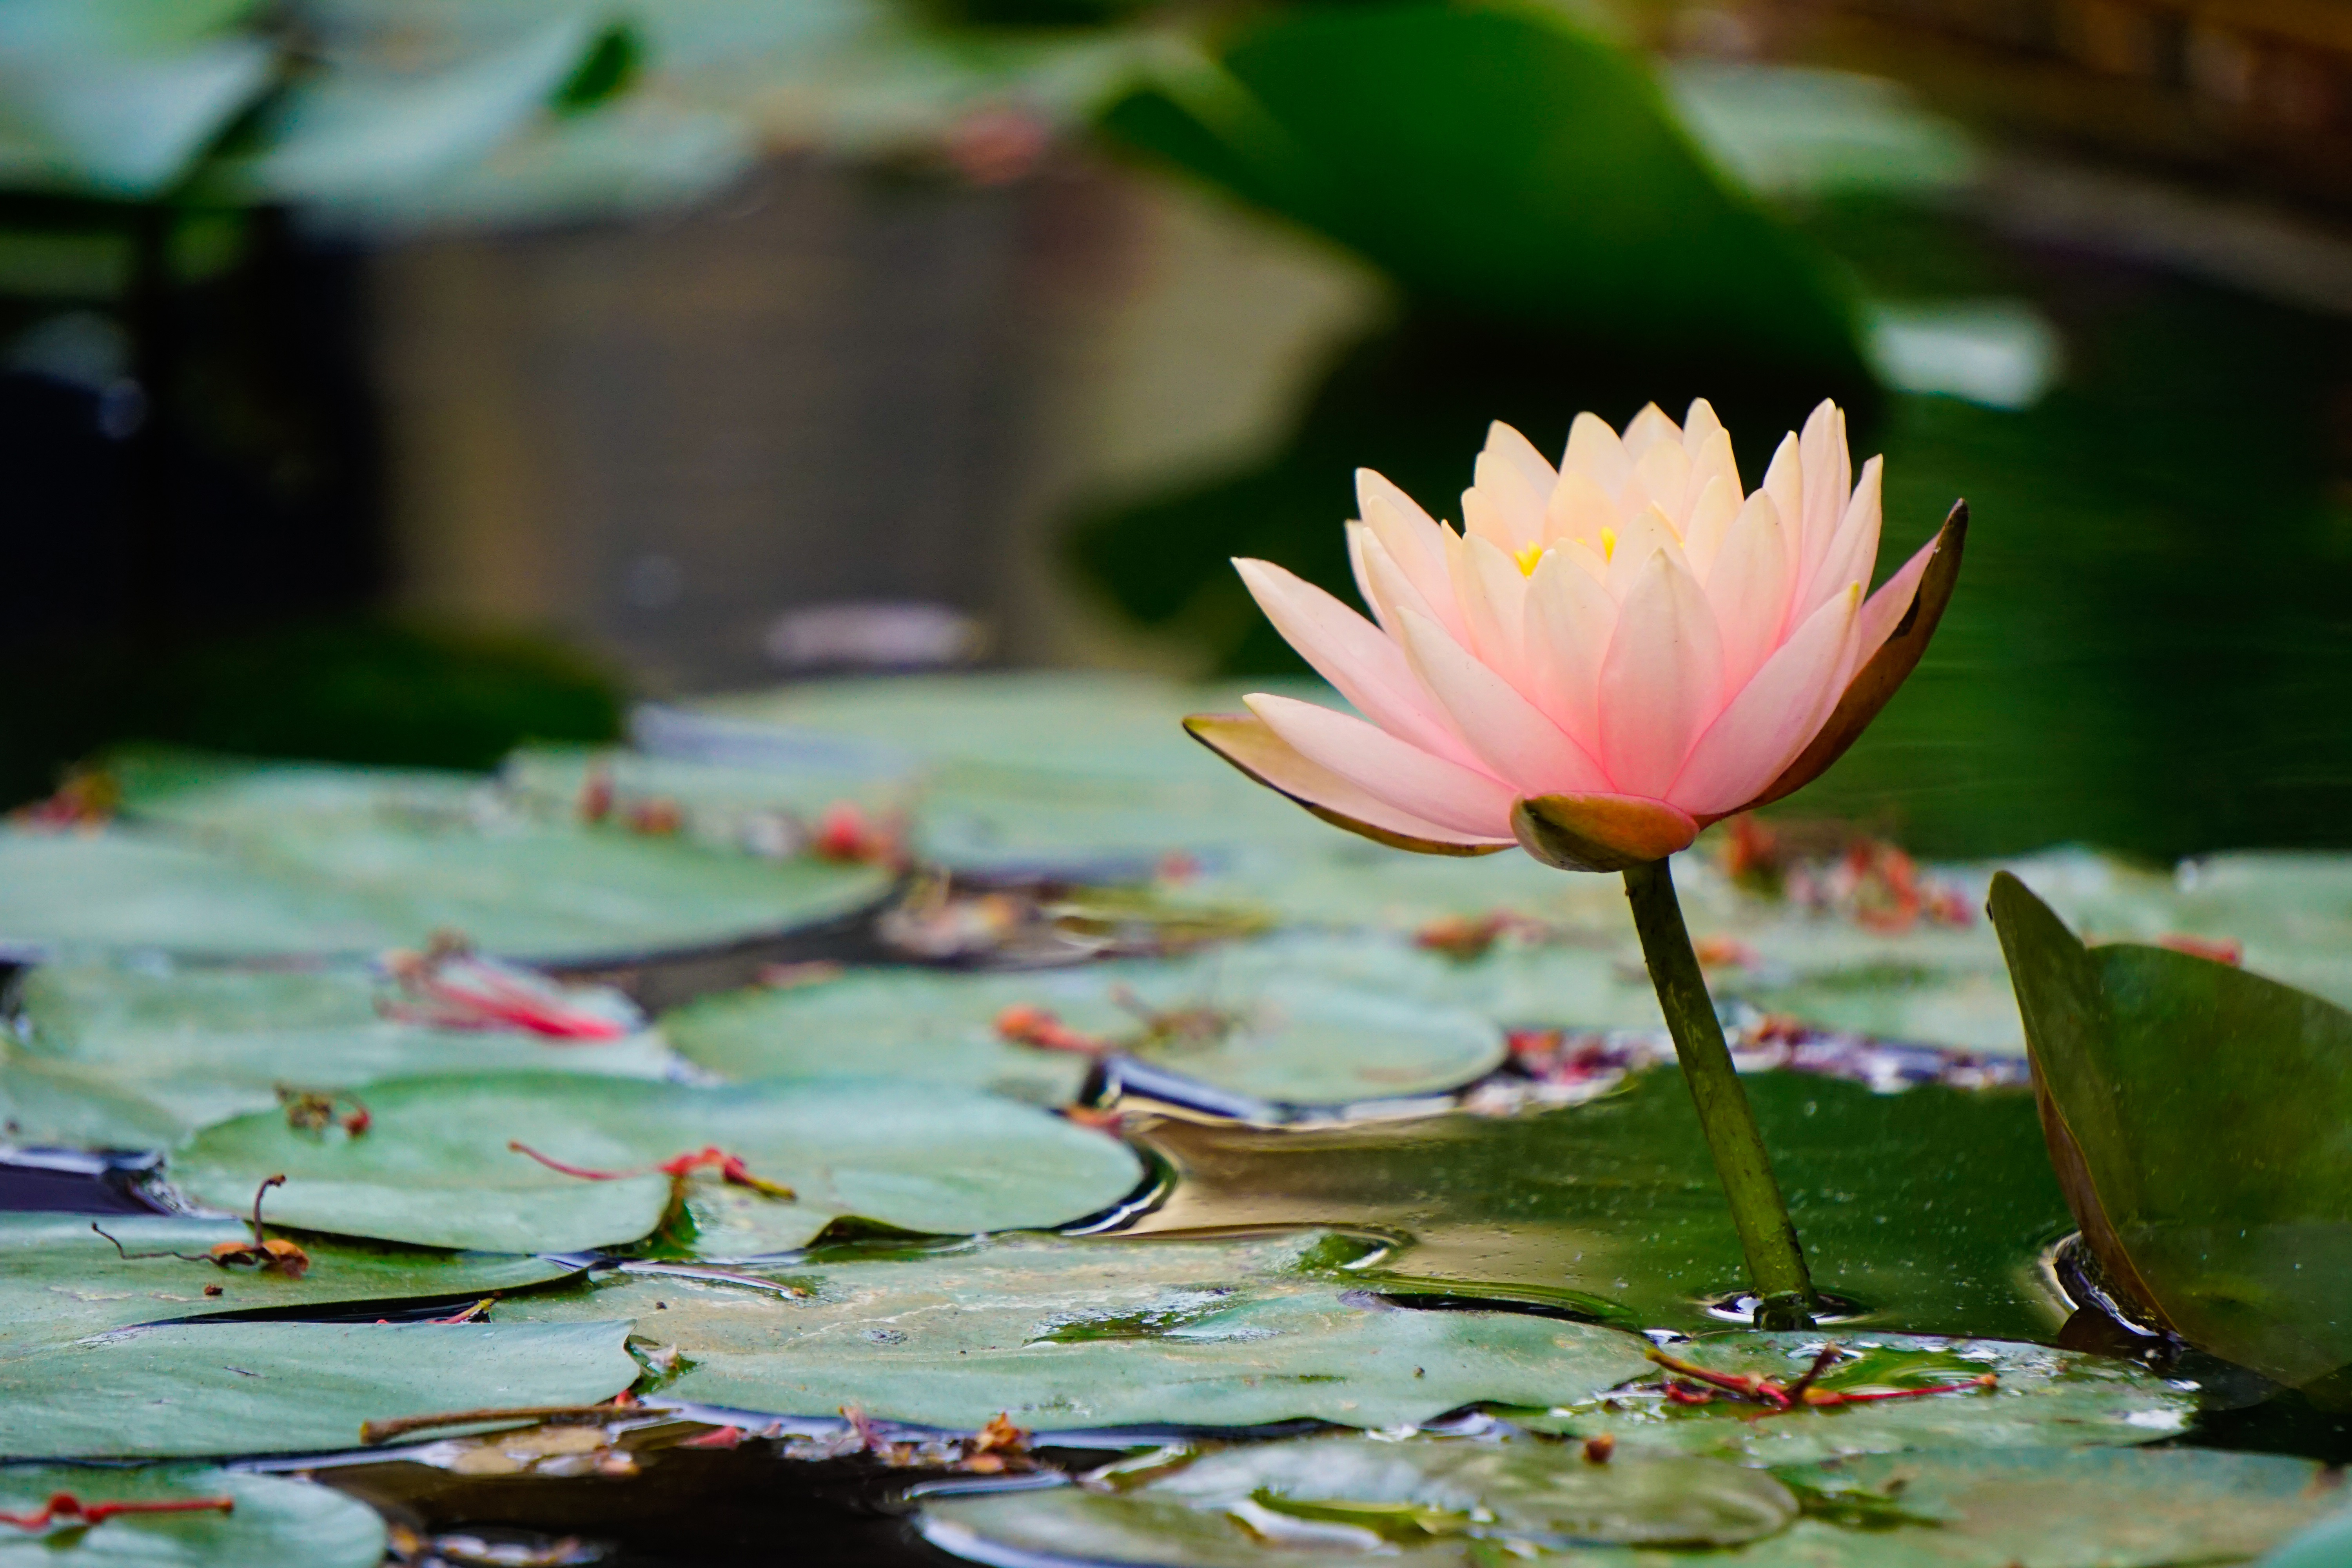 Image of a lotus flower in a pond.